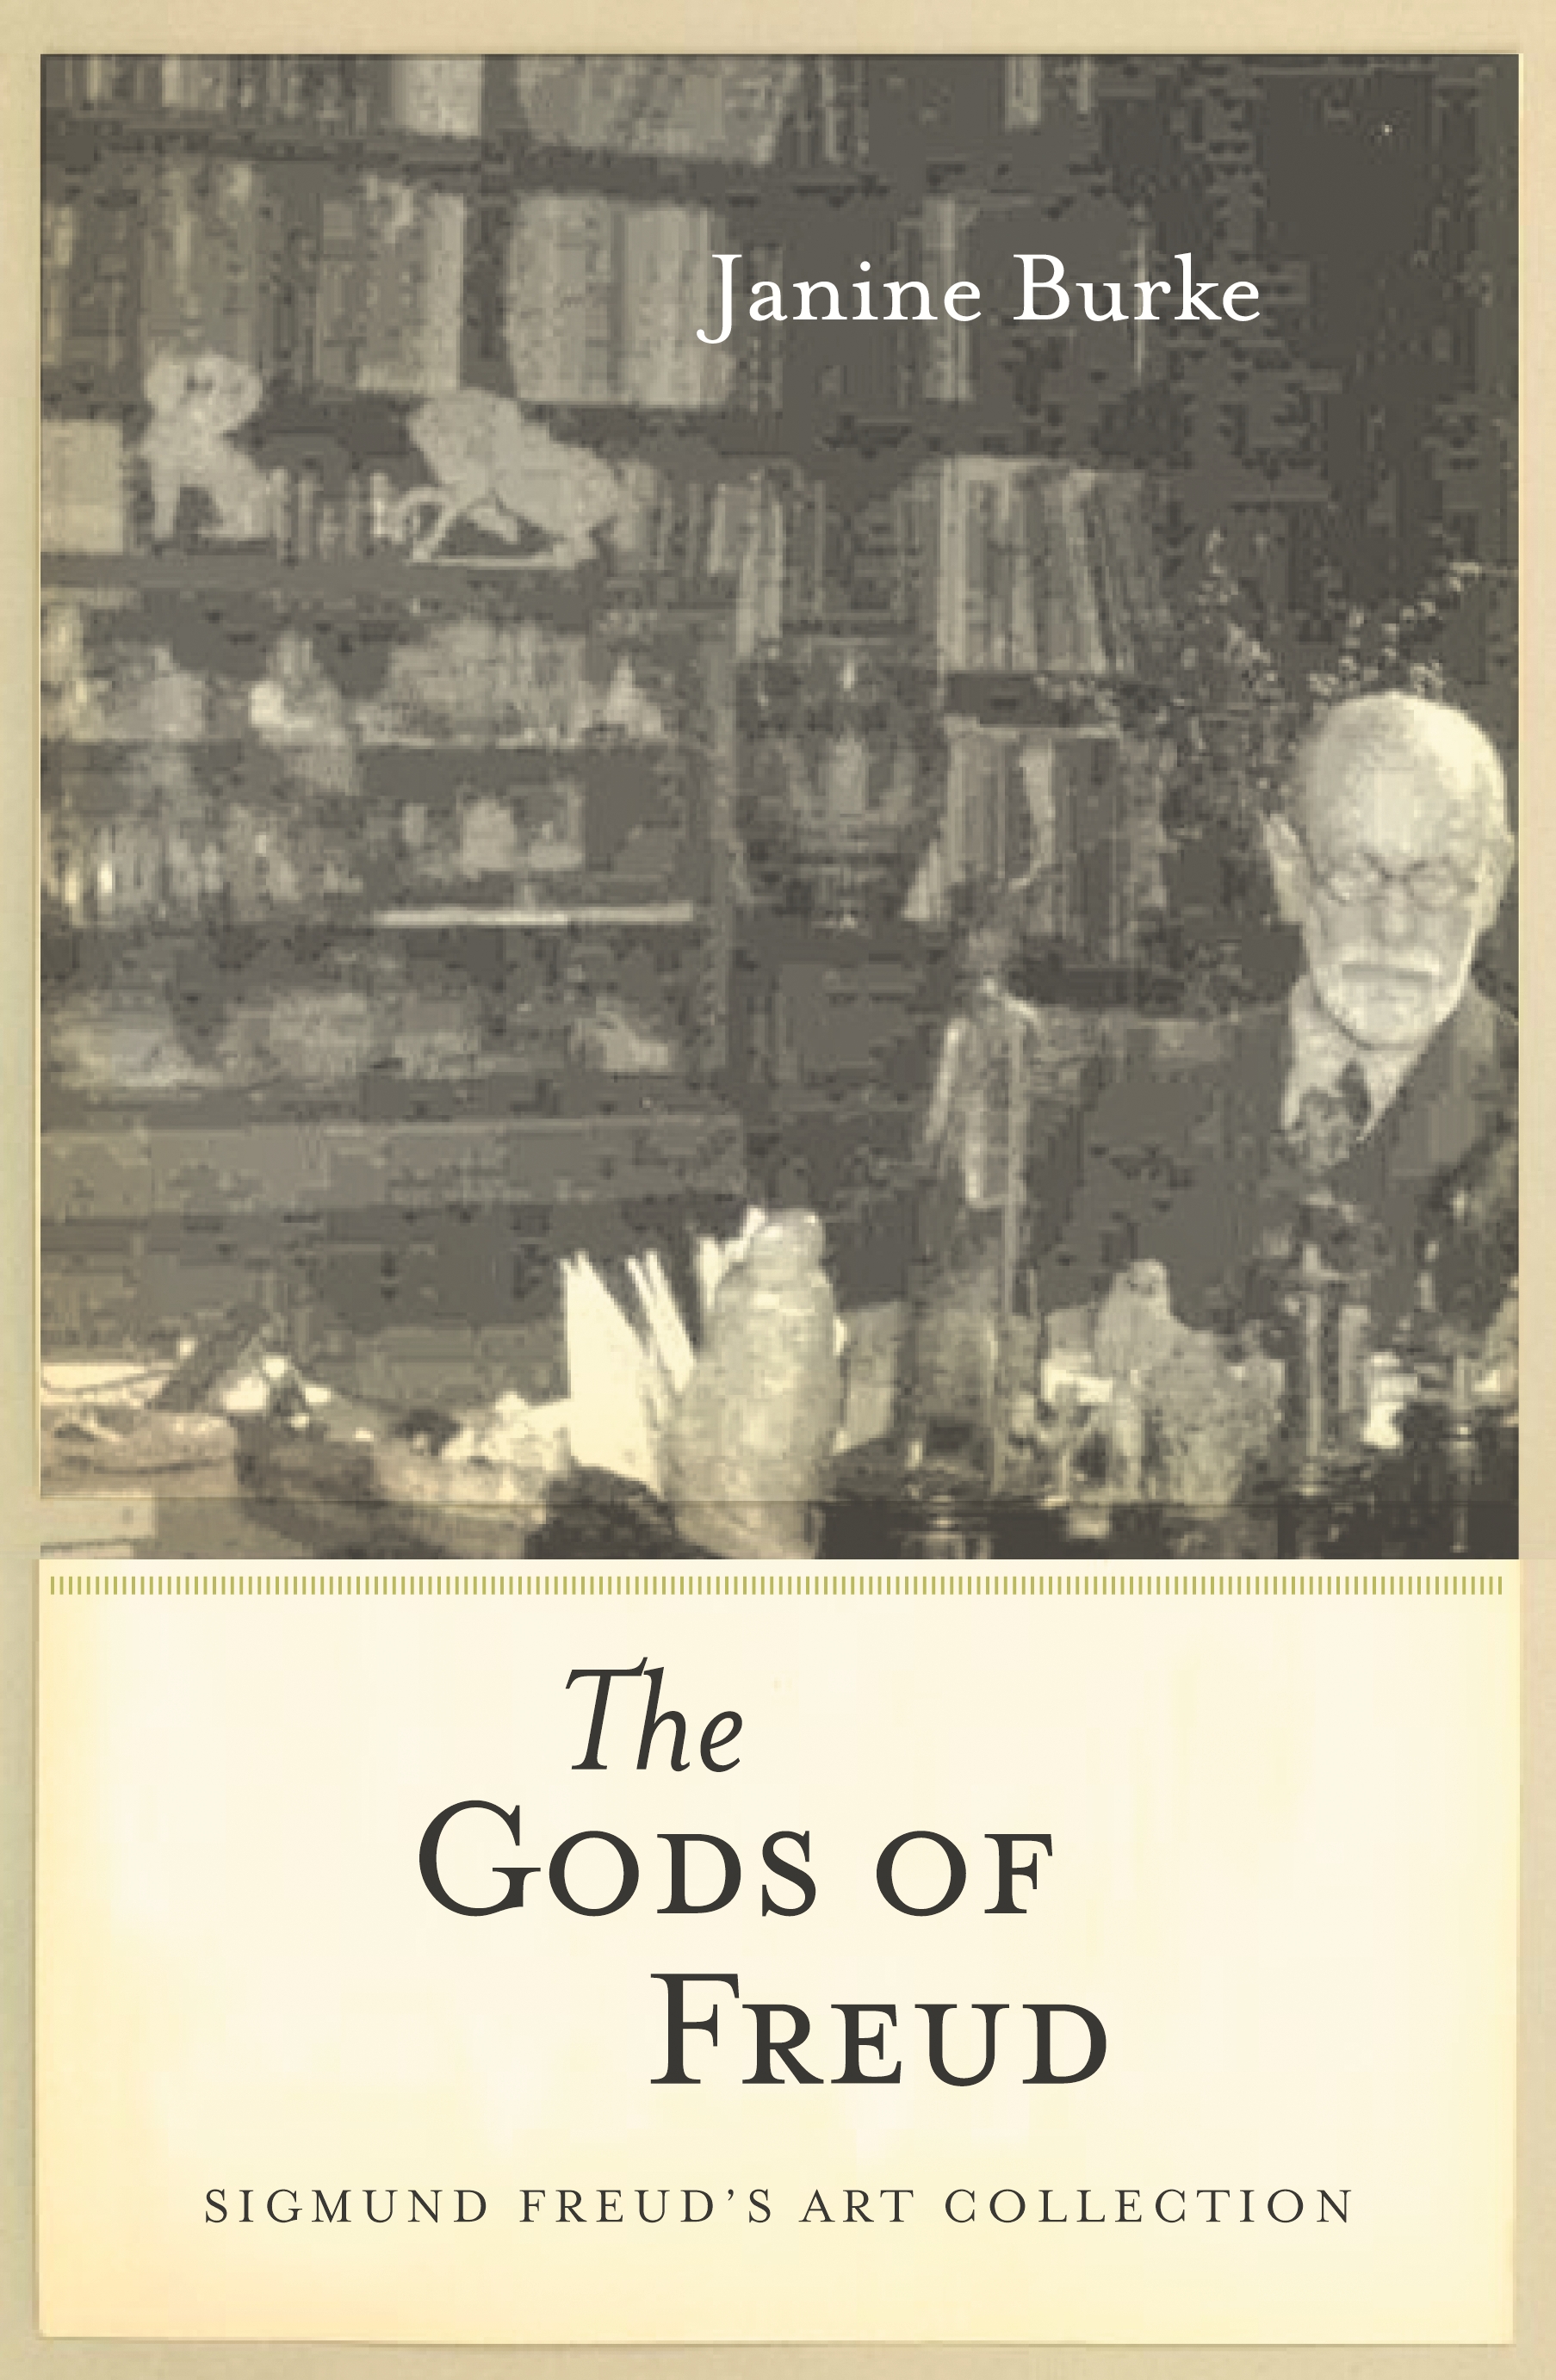 The Gods of Freud: Sigmund Freud's art collection